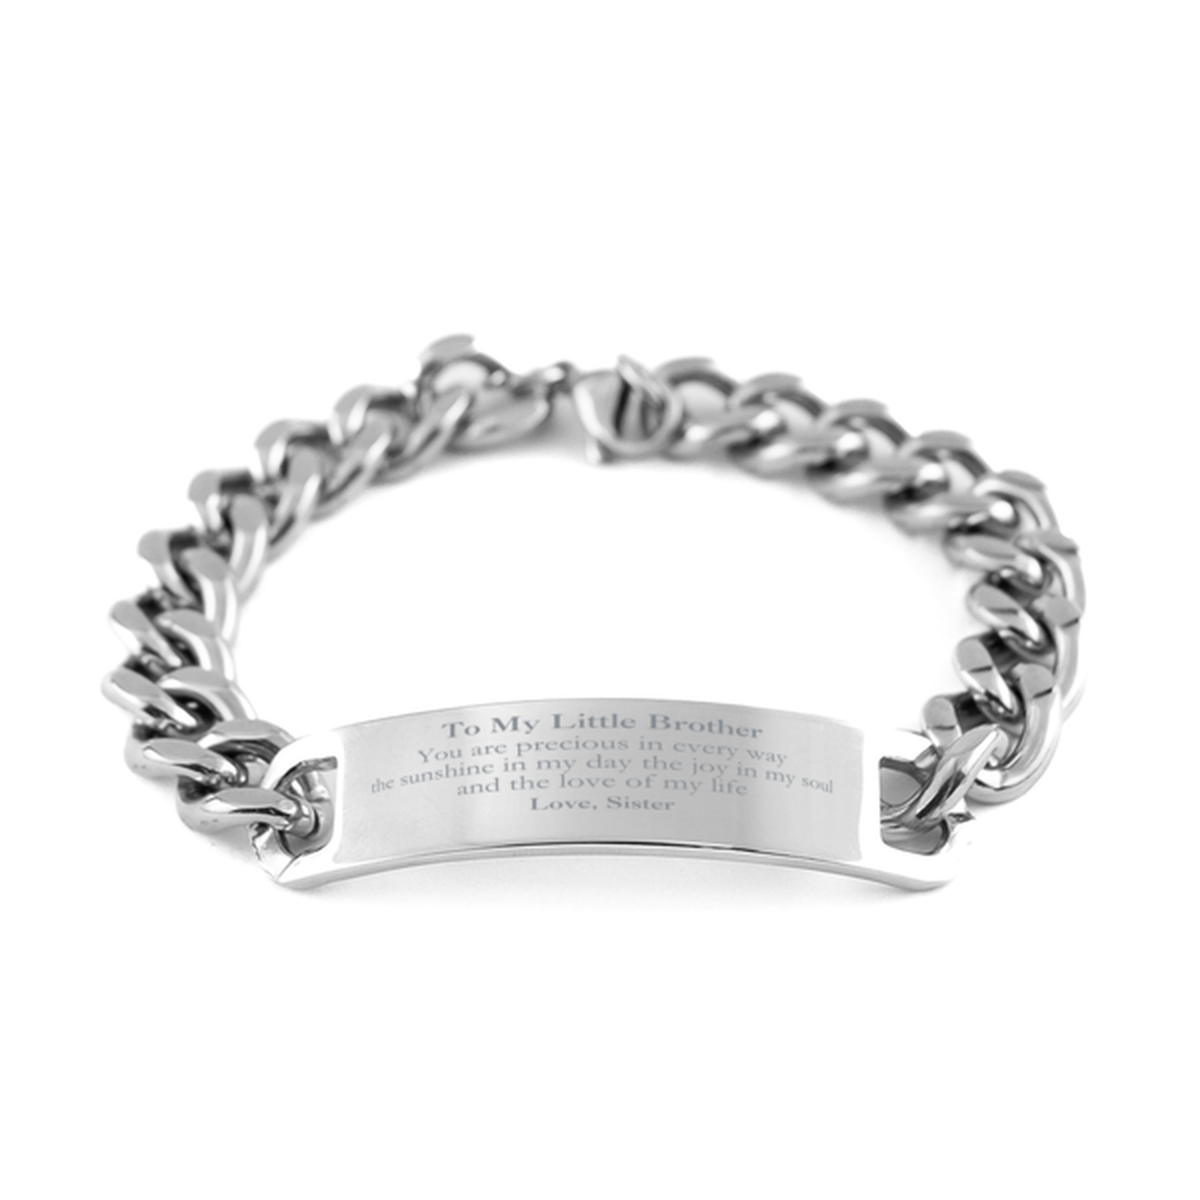 Graduation Gifts for Little Brother Cuban Chain Stainless Steel Bracelet Present from Sister, Christmas Little Brother Birthday Gifts Little Brother You are precious in every way the sunshine in my day. Love, Sister